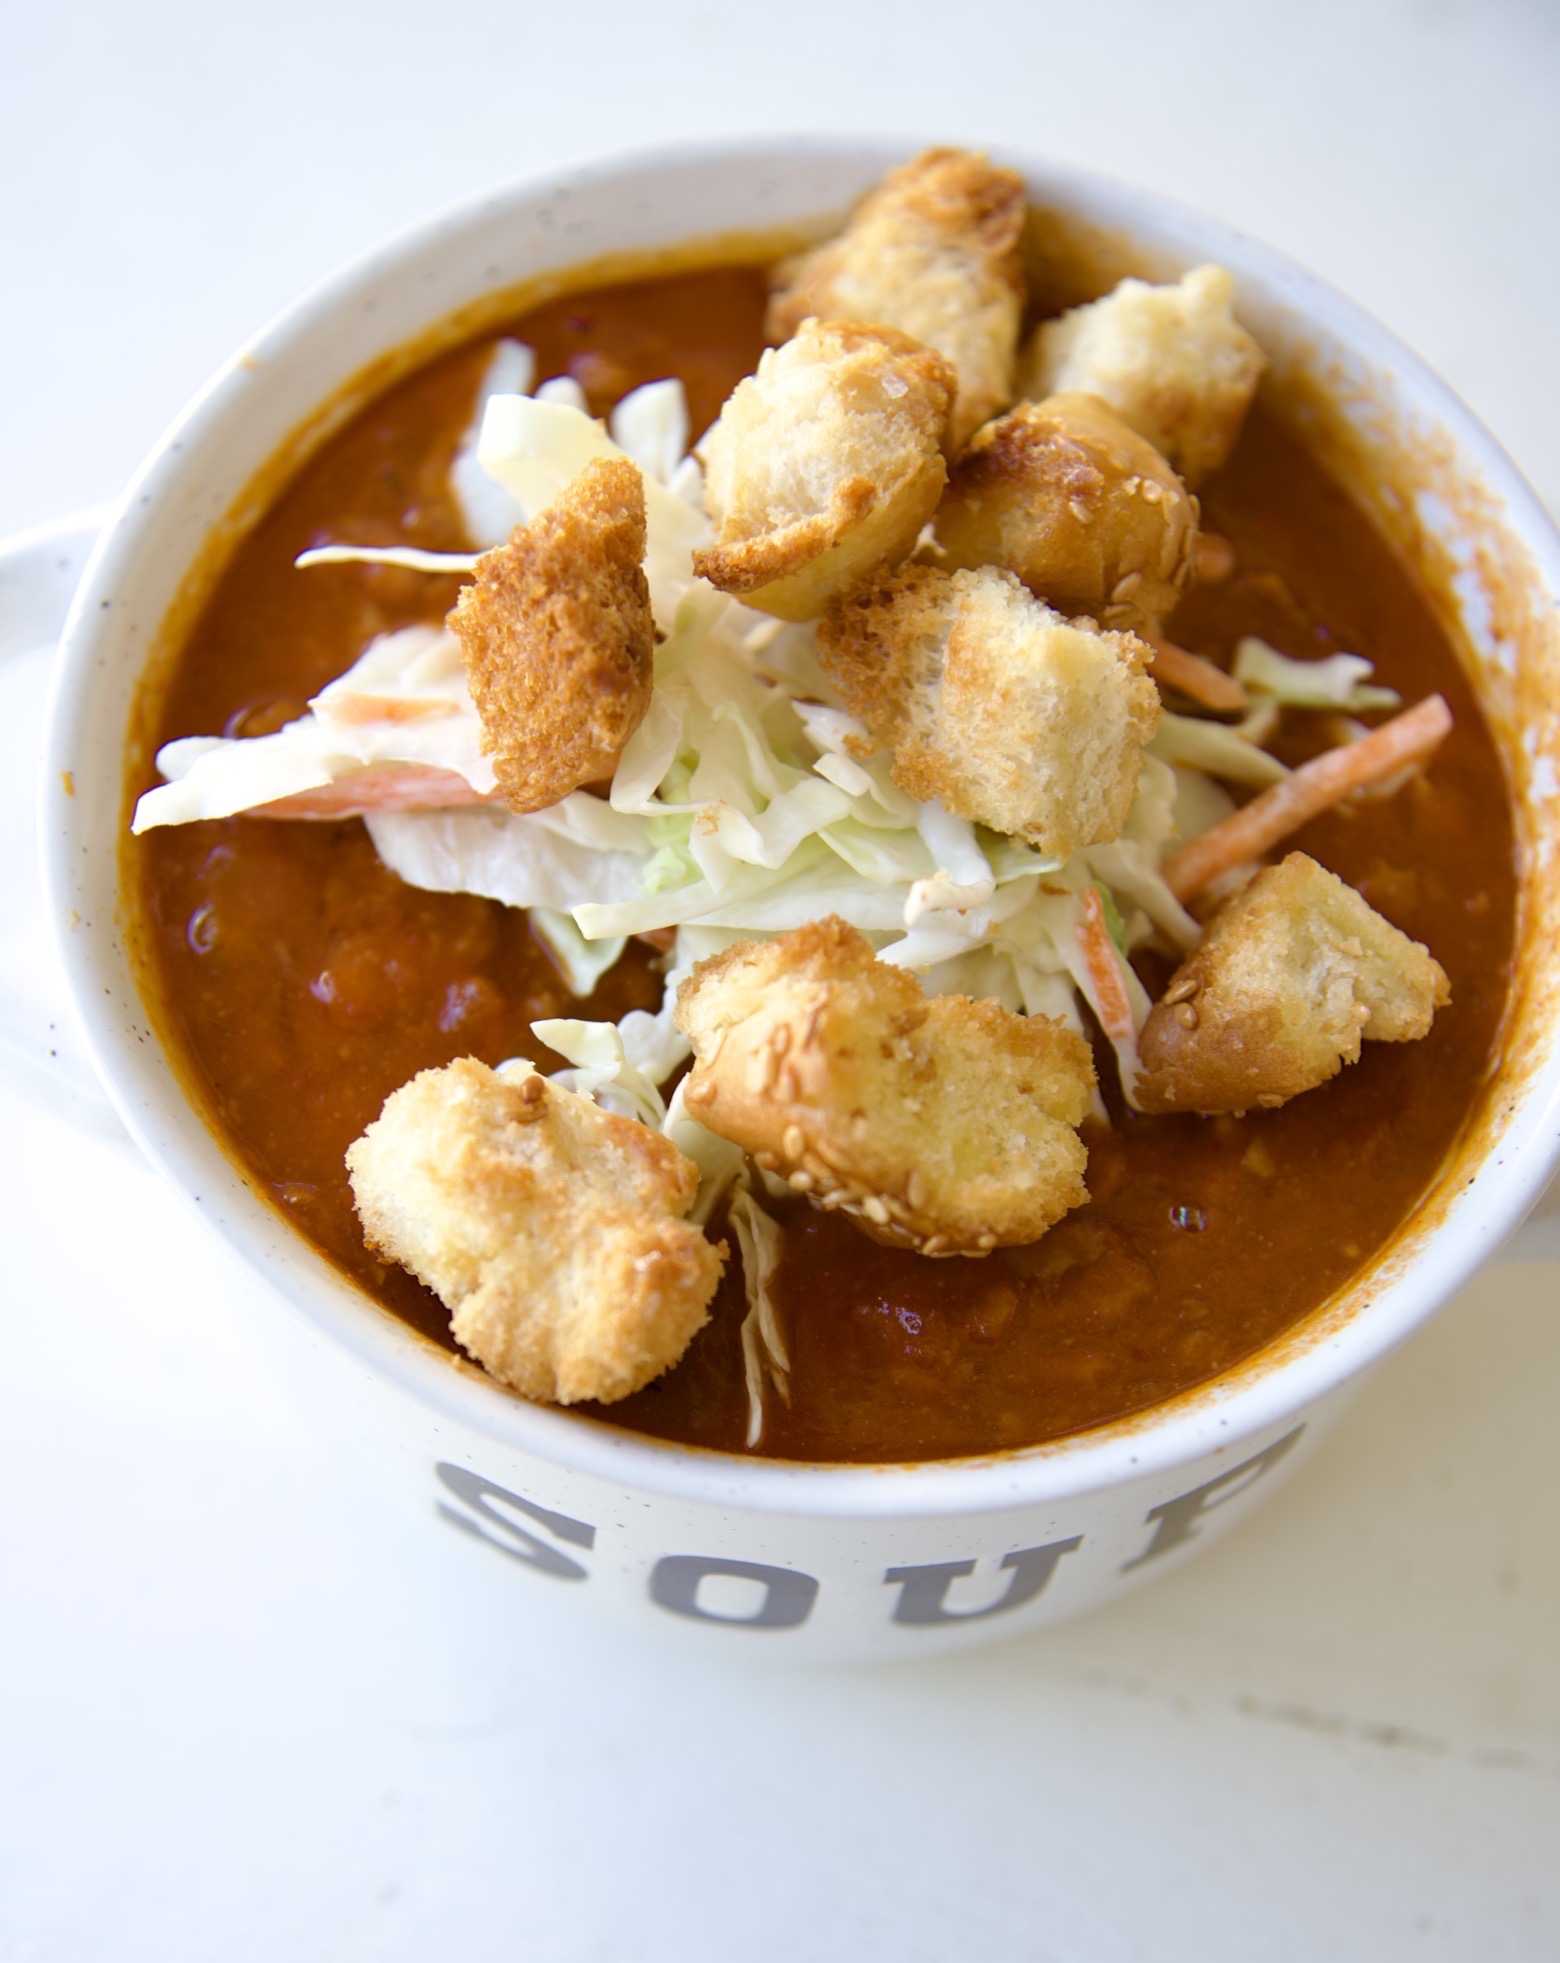 Overhead shot of the soup with croutons and coleslaw piled on top. 